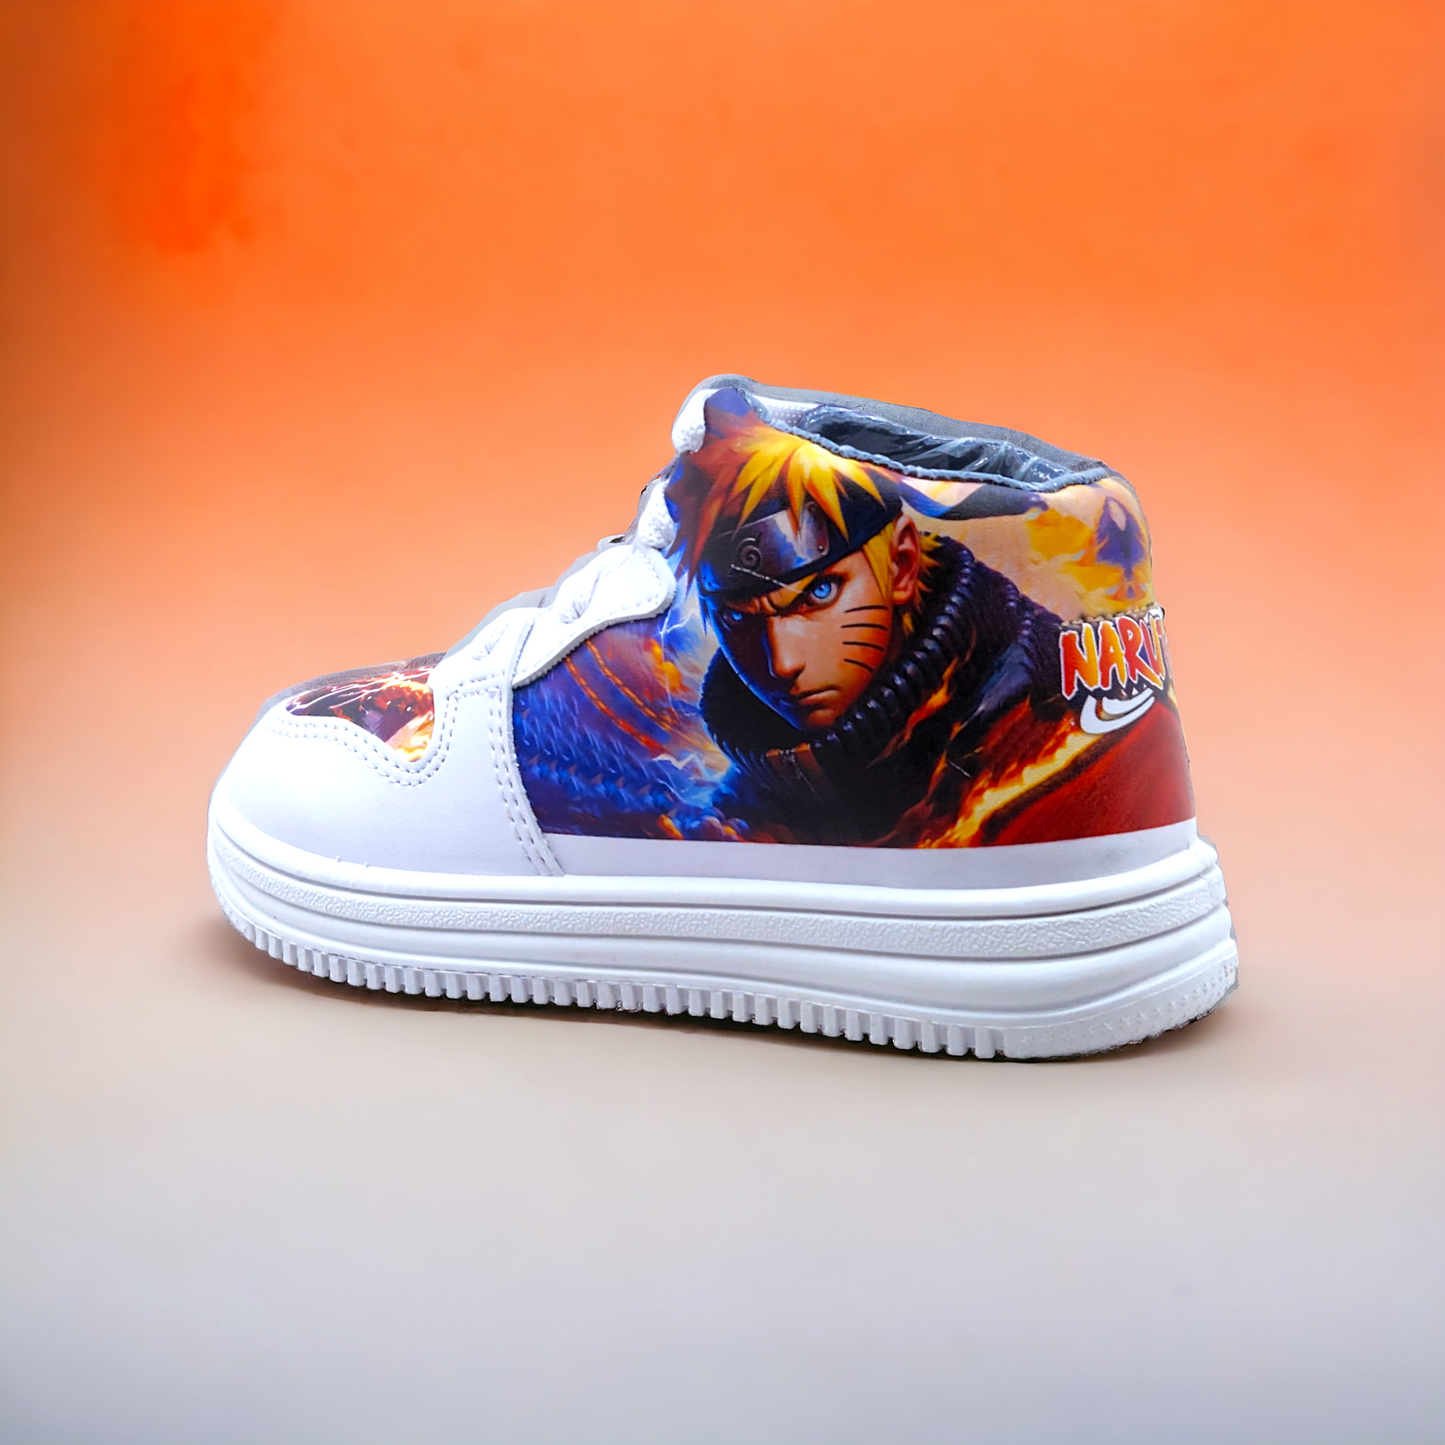 Channel Your Inner Ninja: Rexine Printed Naruto Shoes